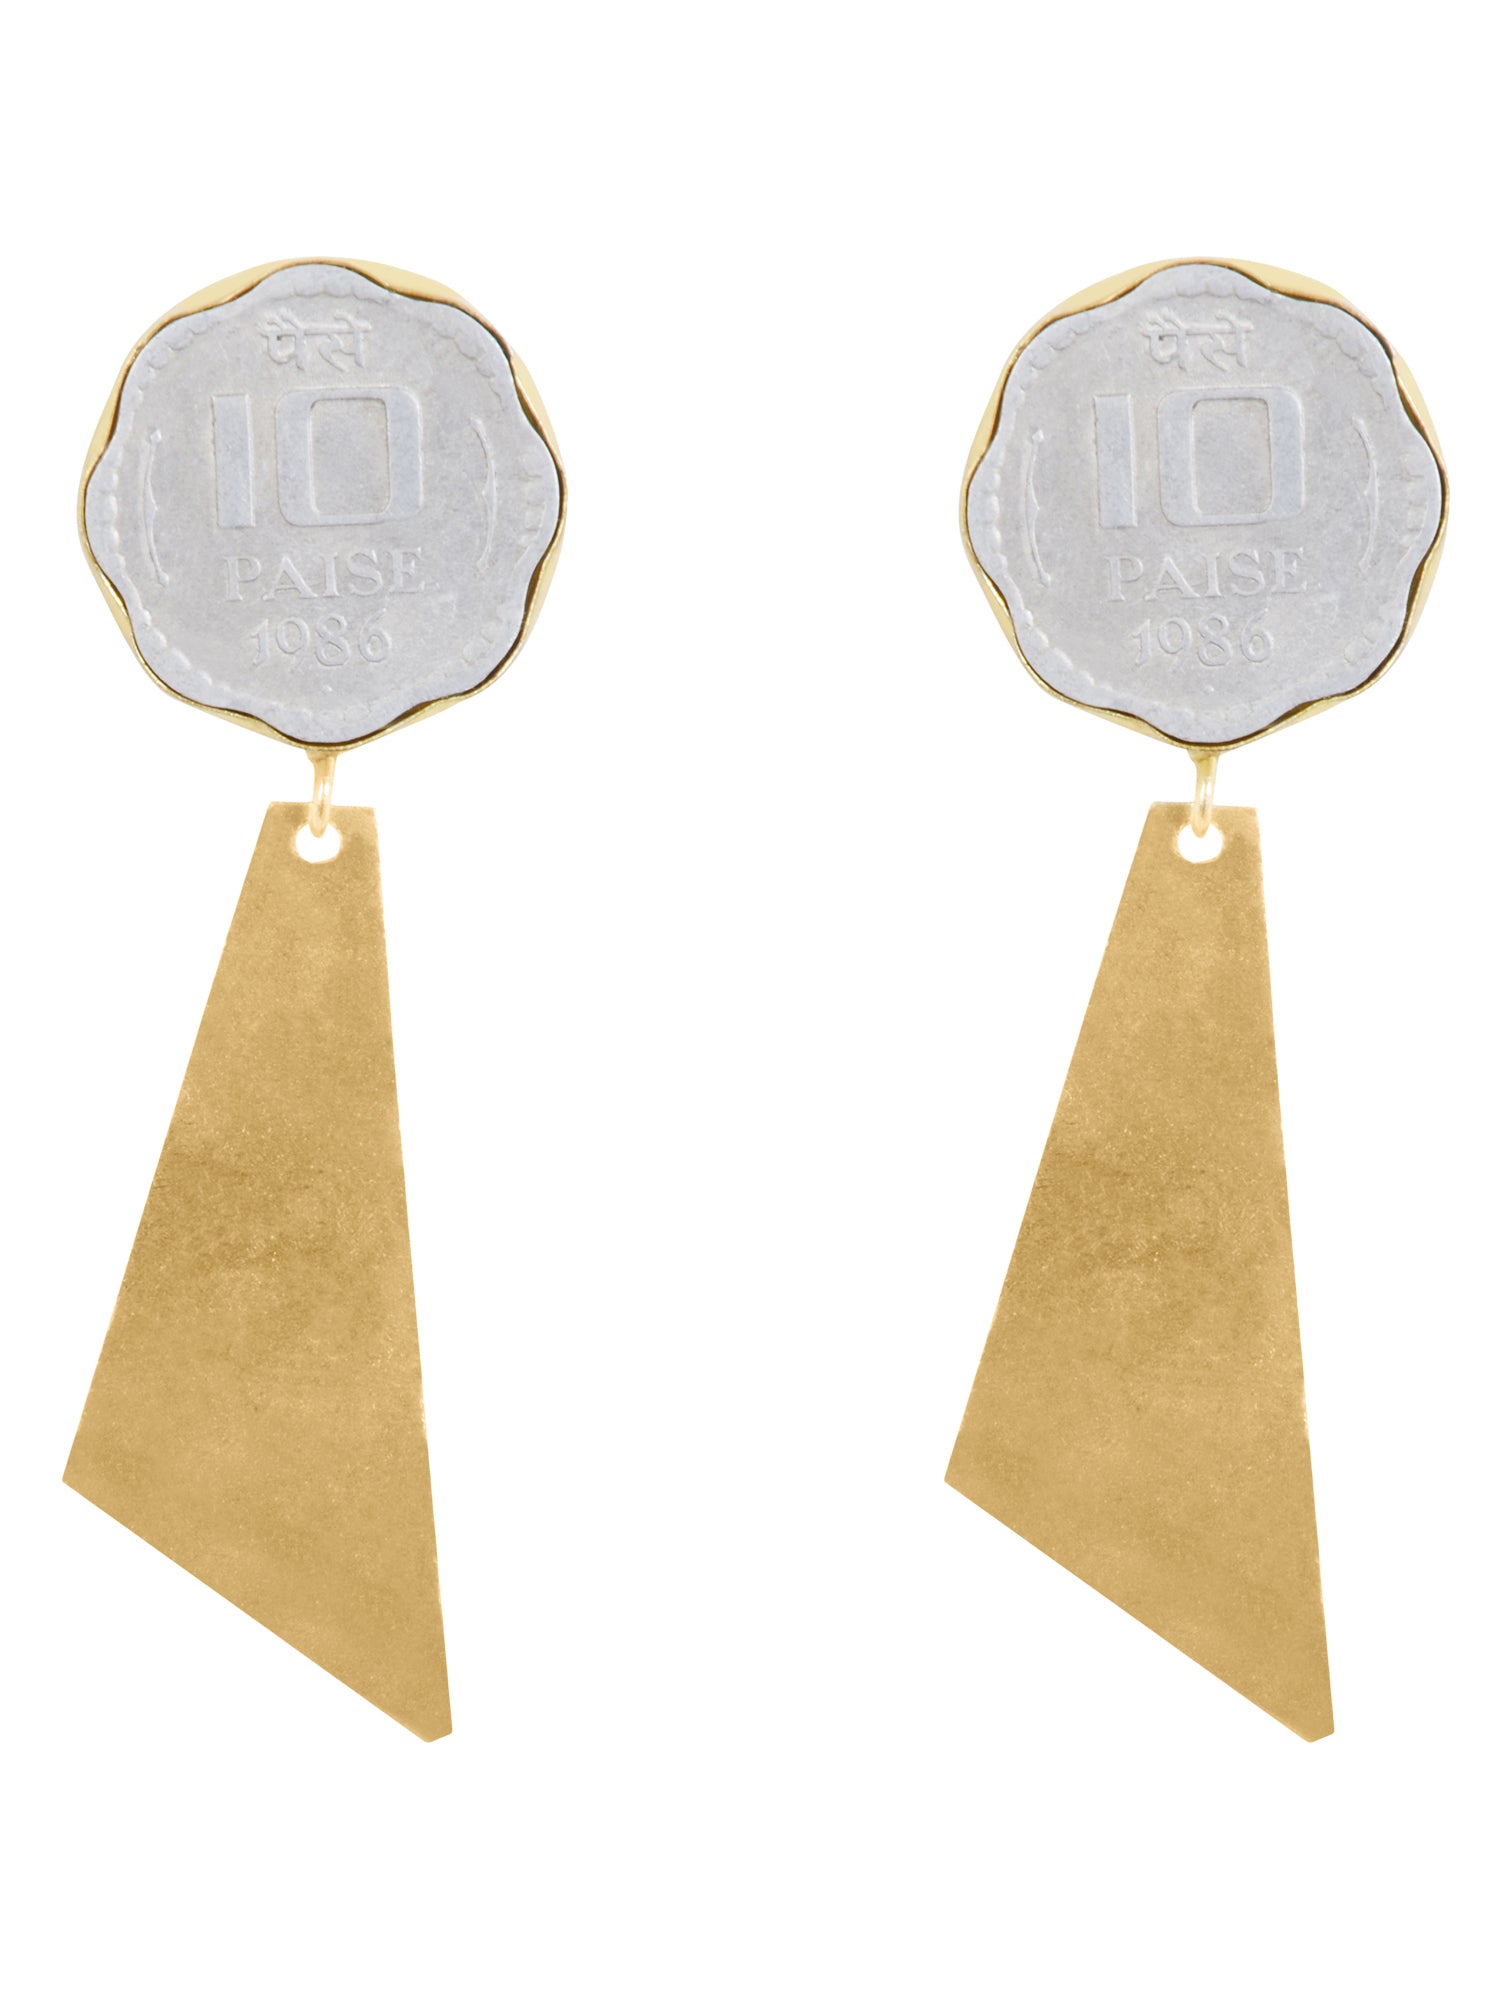 Vintage Gold Polish Coin Collection Earrings